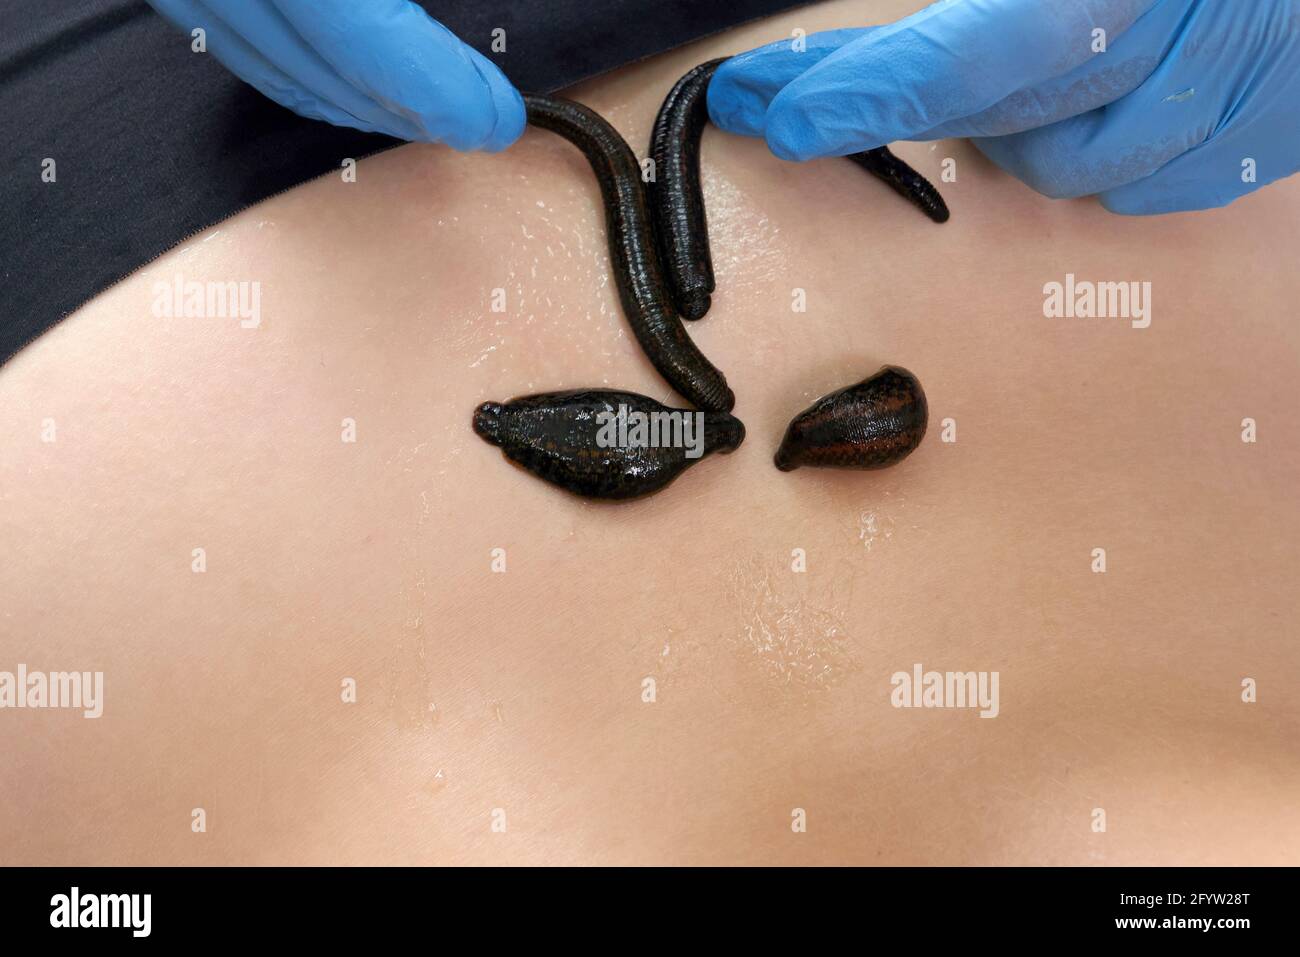 https://c8.alamy.com/comp/2FYW28T/medical-leeches-on-a-human-body-drink-blood-treatment-with-leeches-2FYW28T.jpg